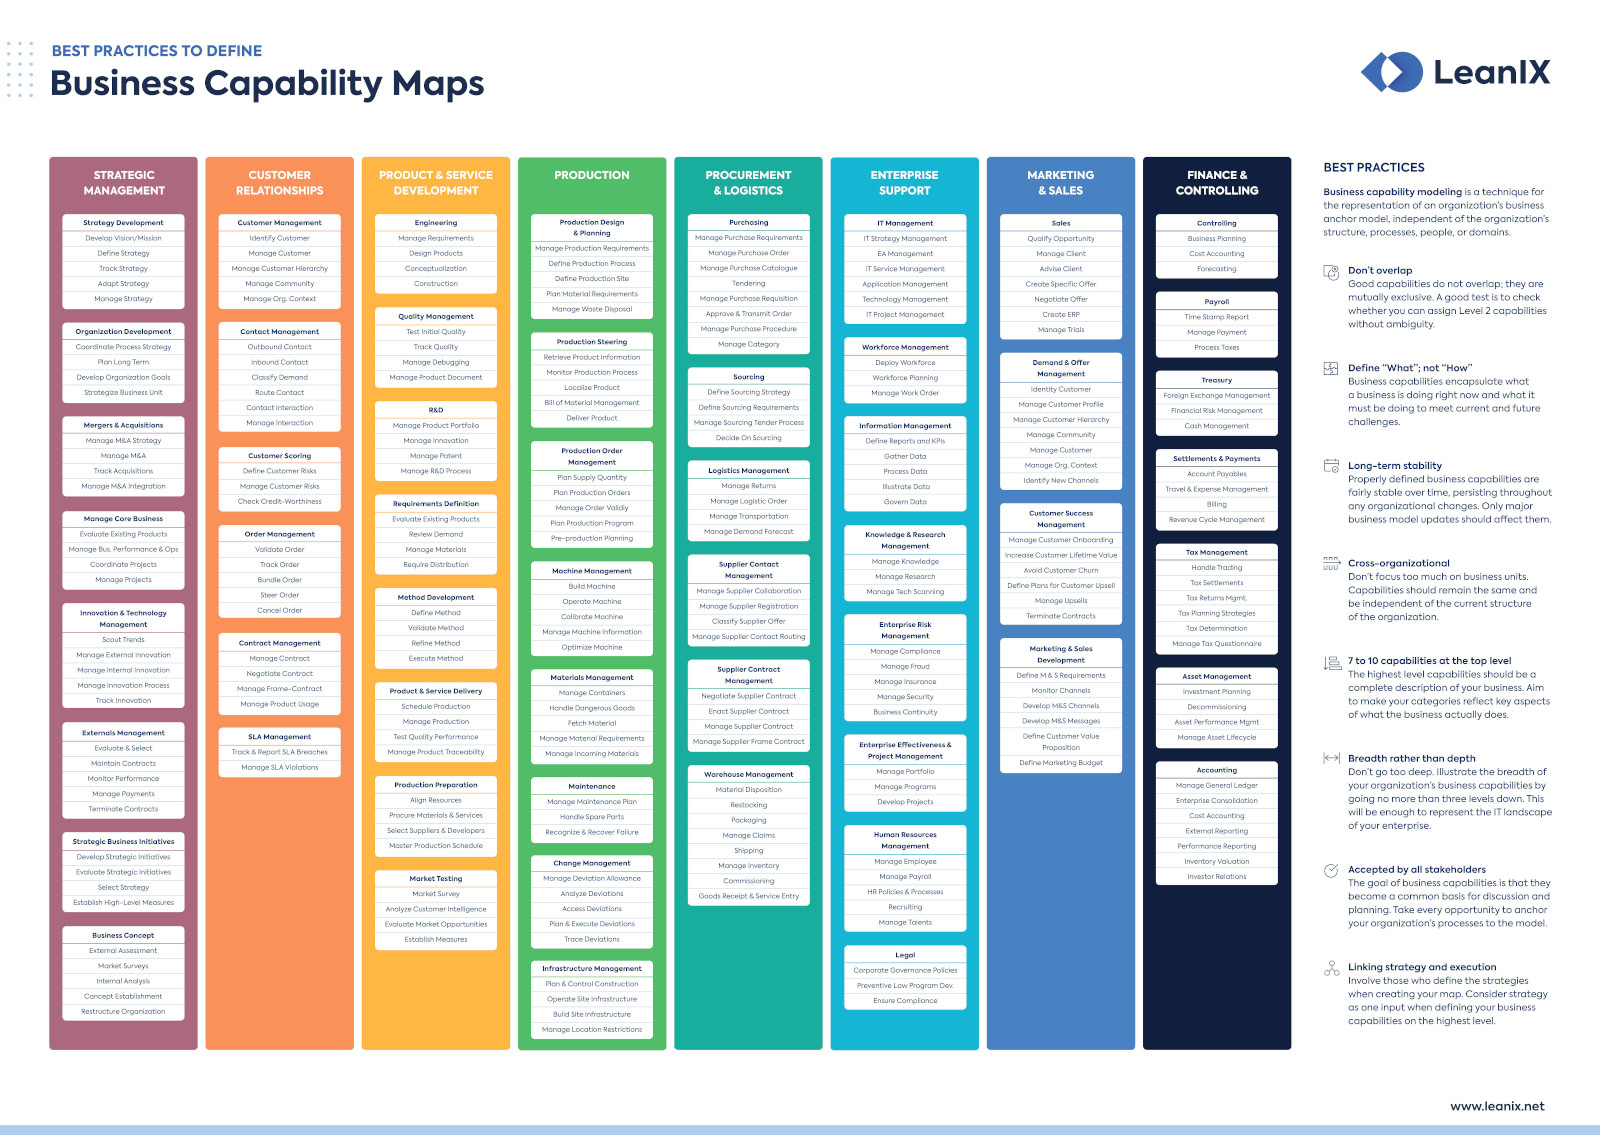 Best practices to define business capability maps